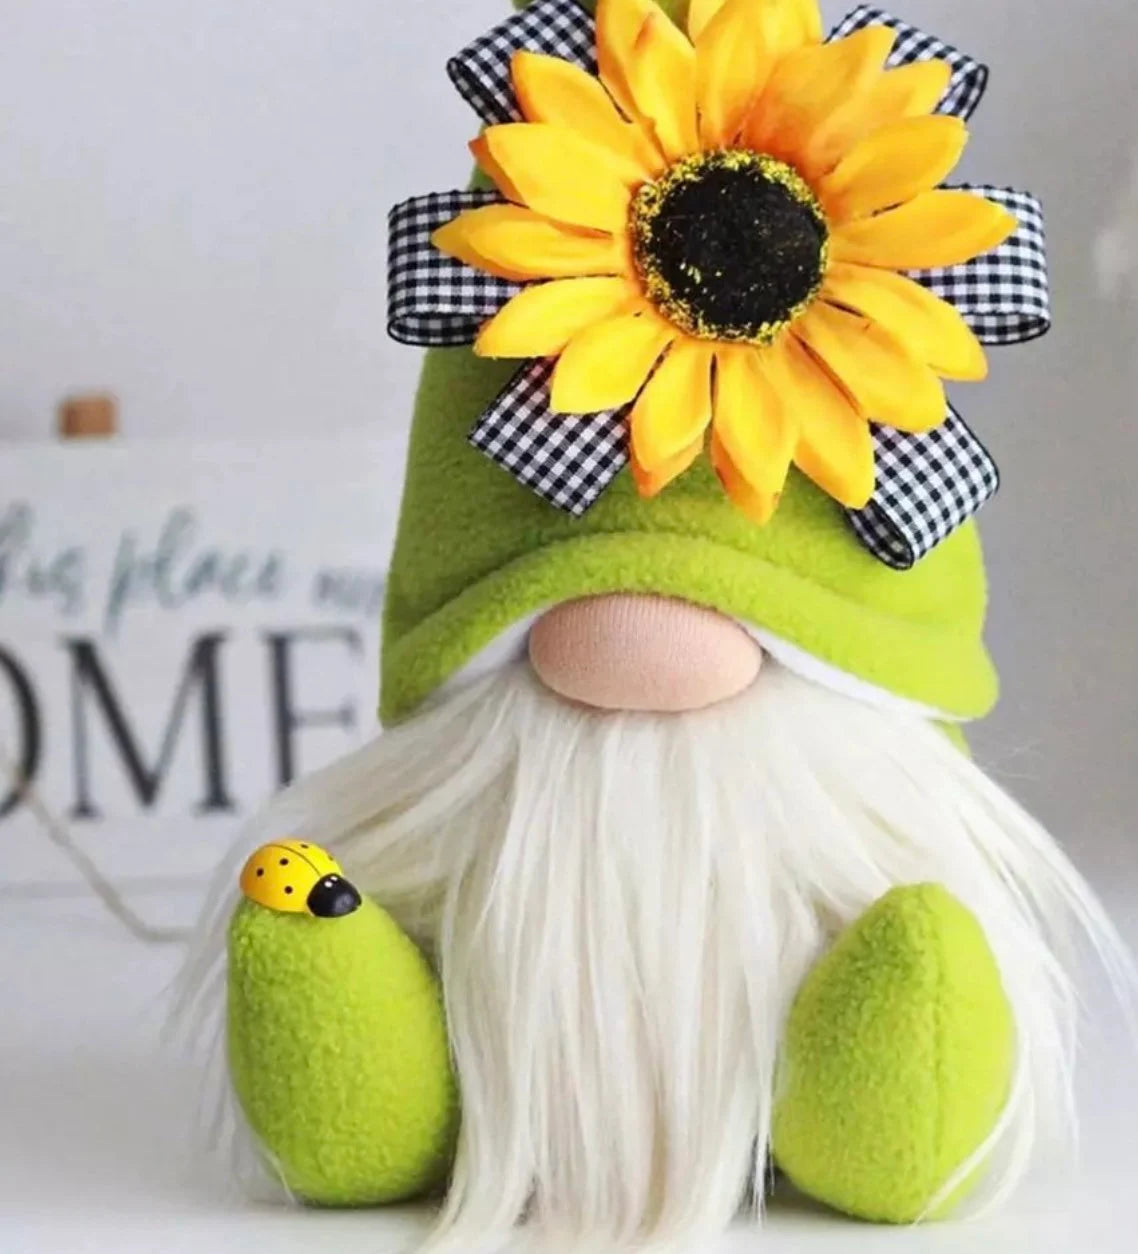 Sunflower Gnome Festive Decoration - Fall Gnomes with Sunflowers - every girl love sparkle